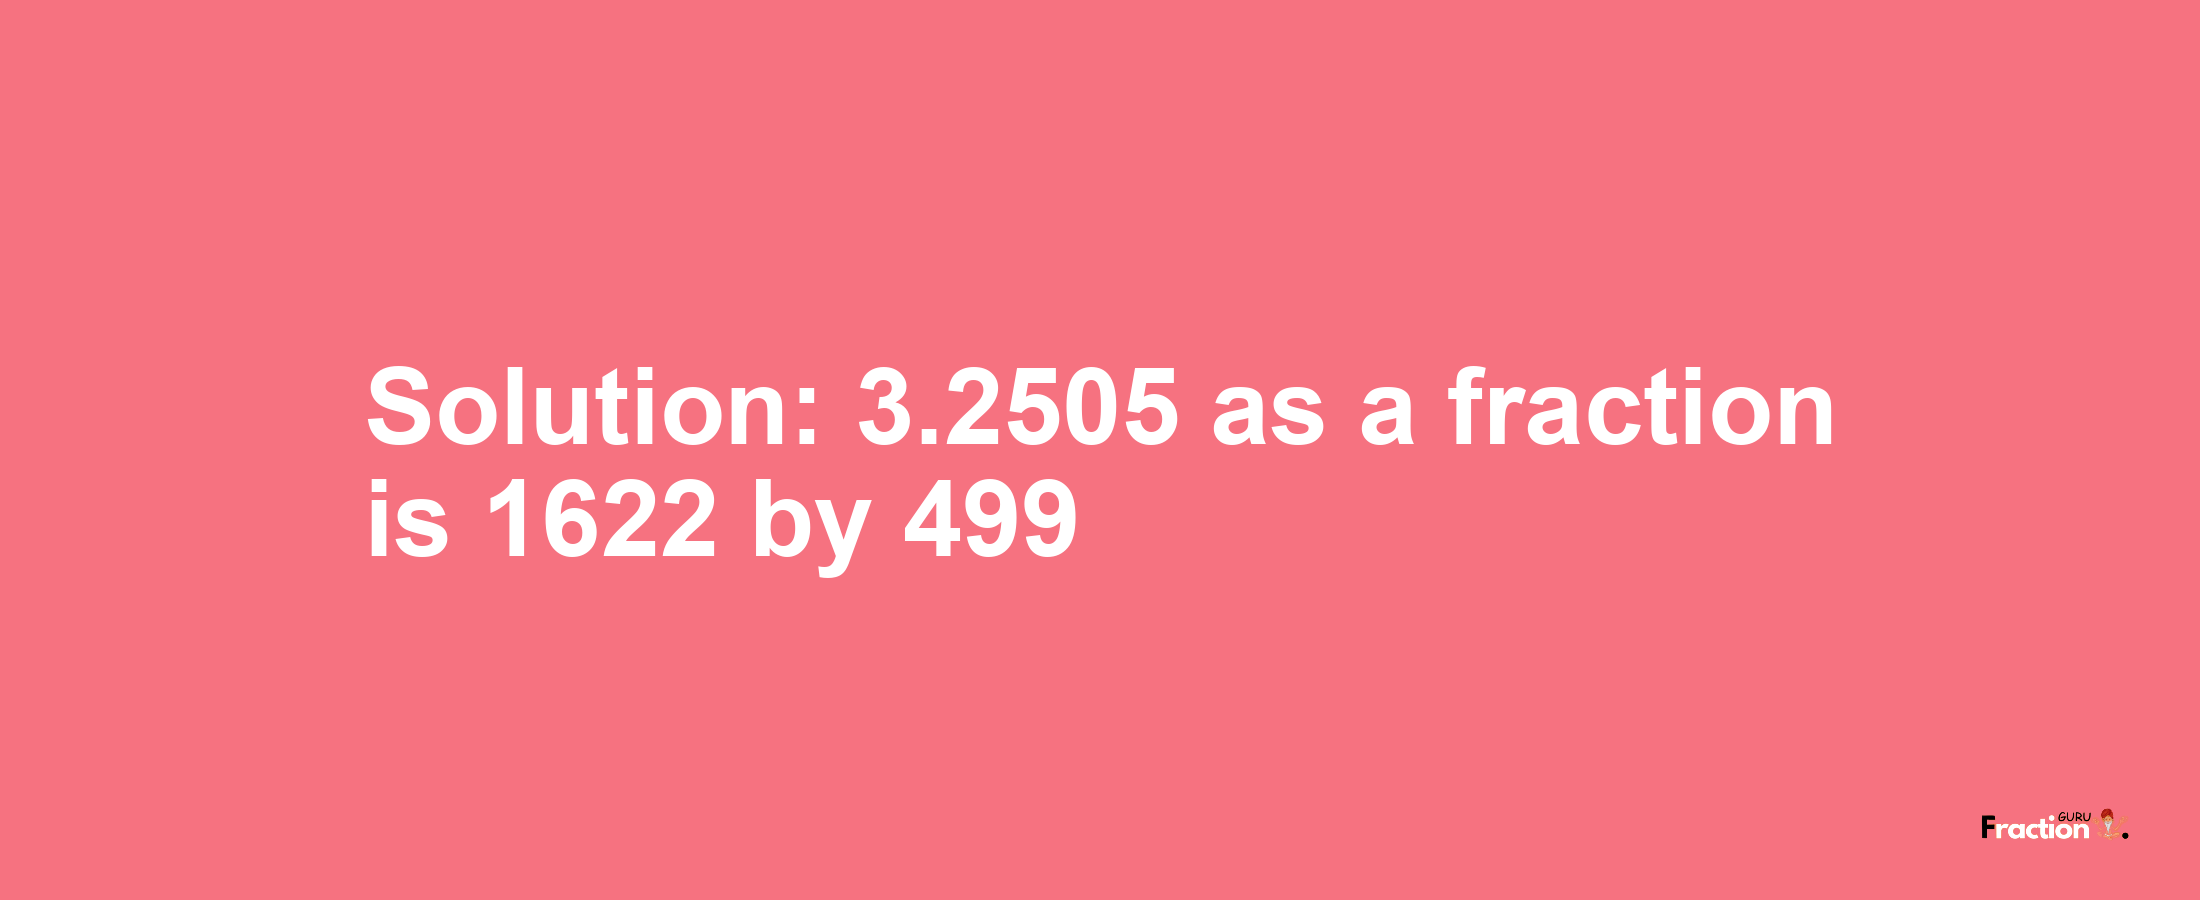 Solution:3.2505 as a fraction is 1622/499